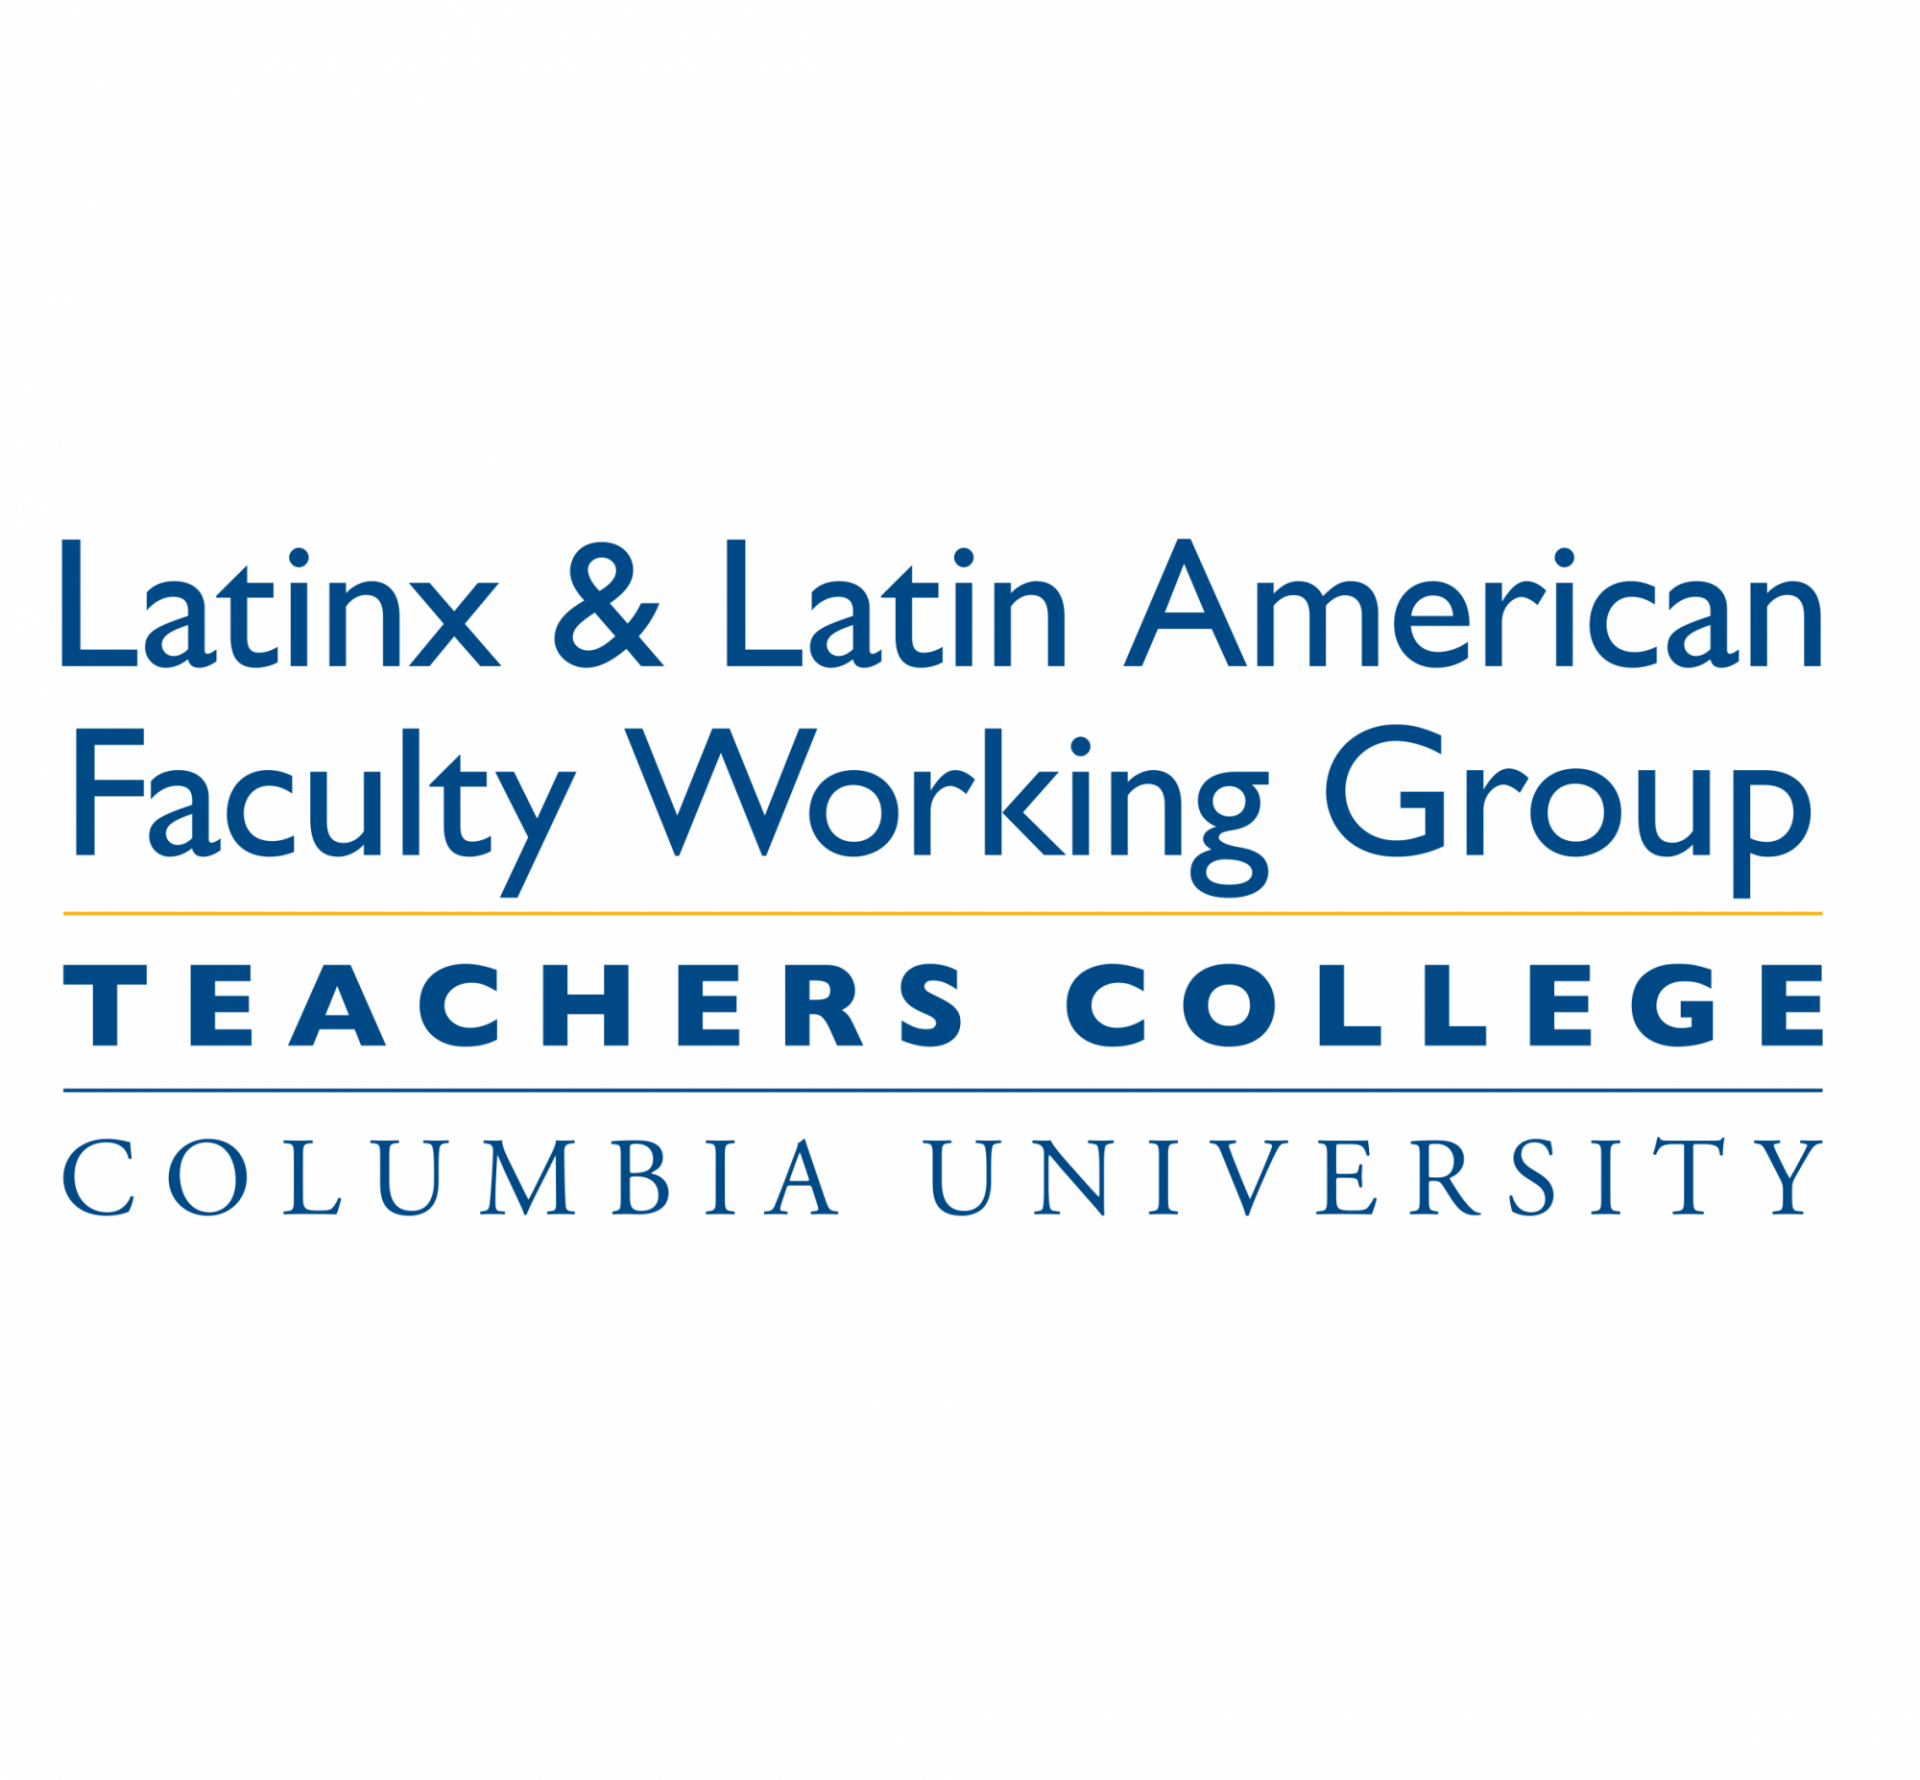 Latinx & Latin American Faculty Working Group at Teachers College and Columbia University logo.